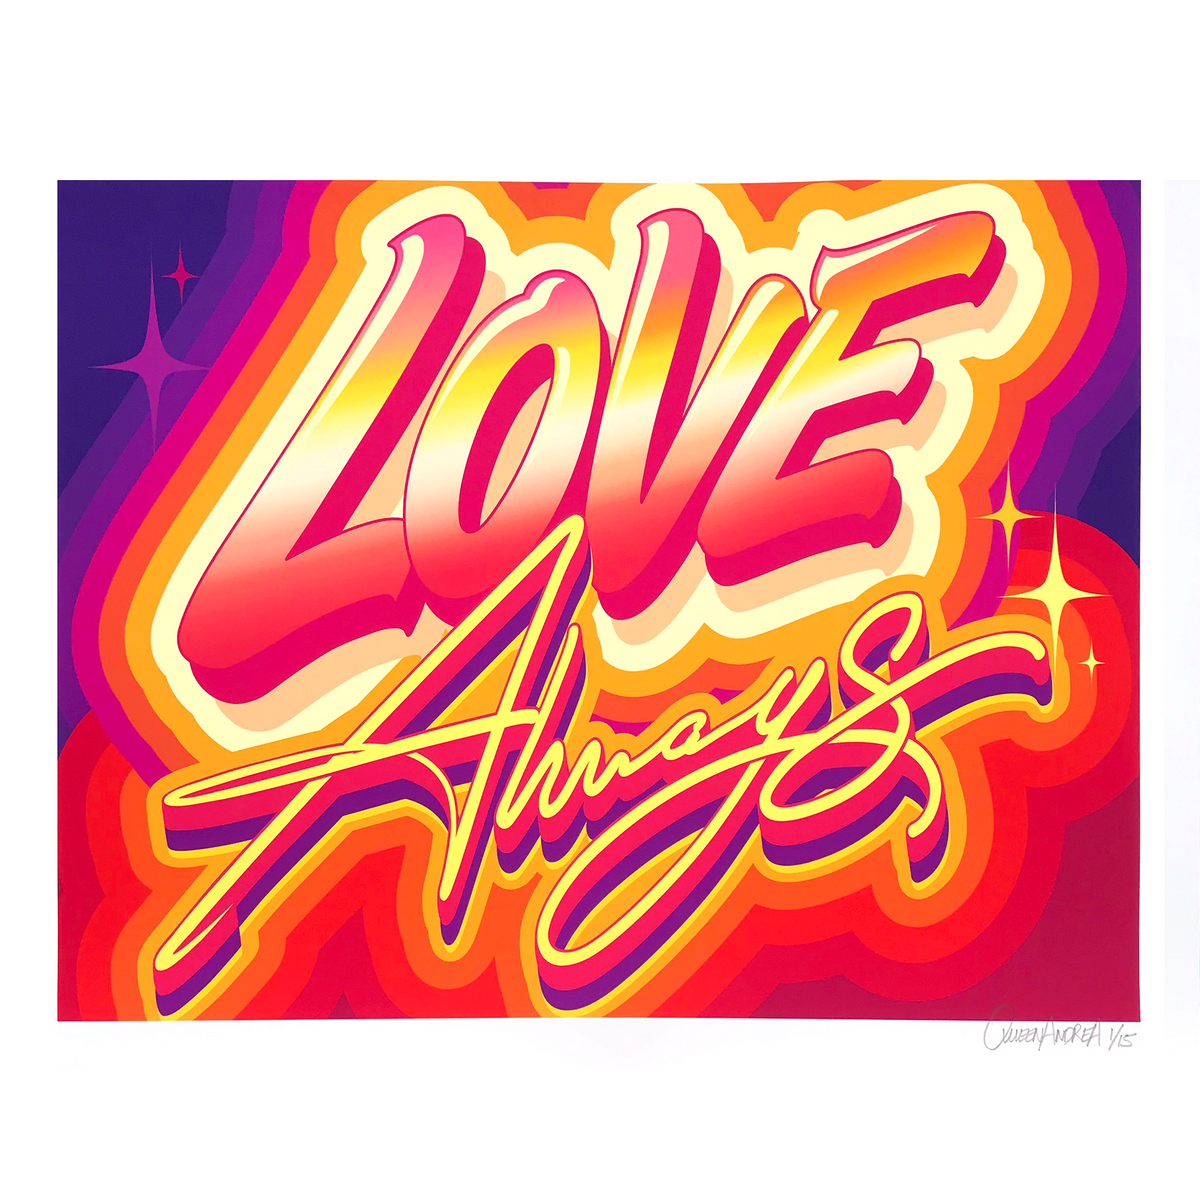 Queen Andrea &quot;Love Always&quot; - Archival Print, Limited Edition of 15 - 16 x 20&quot;